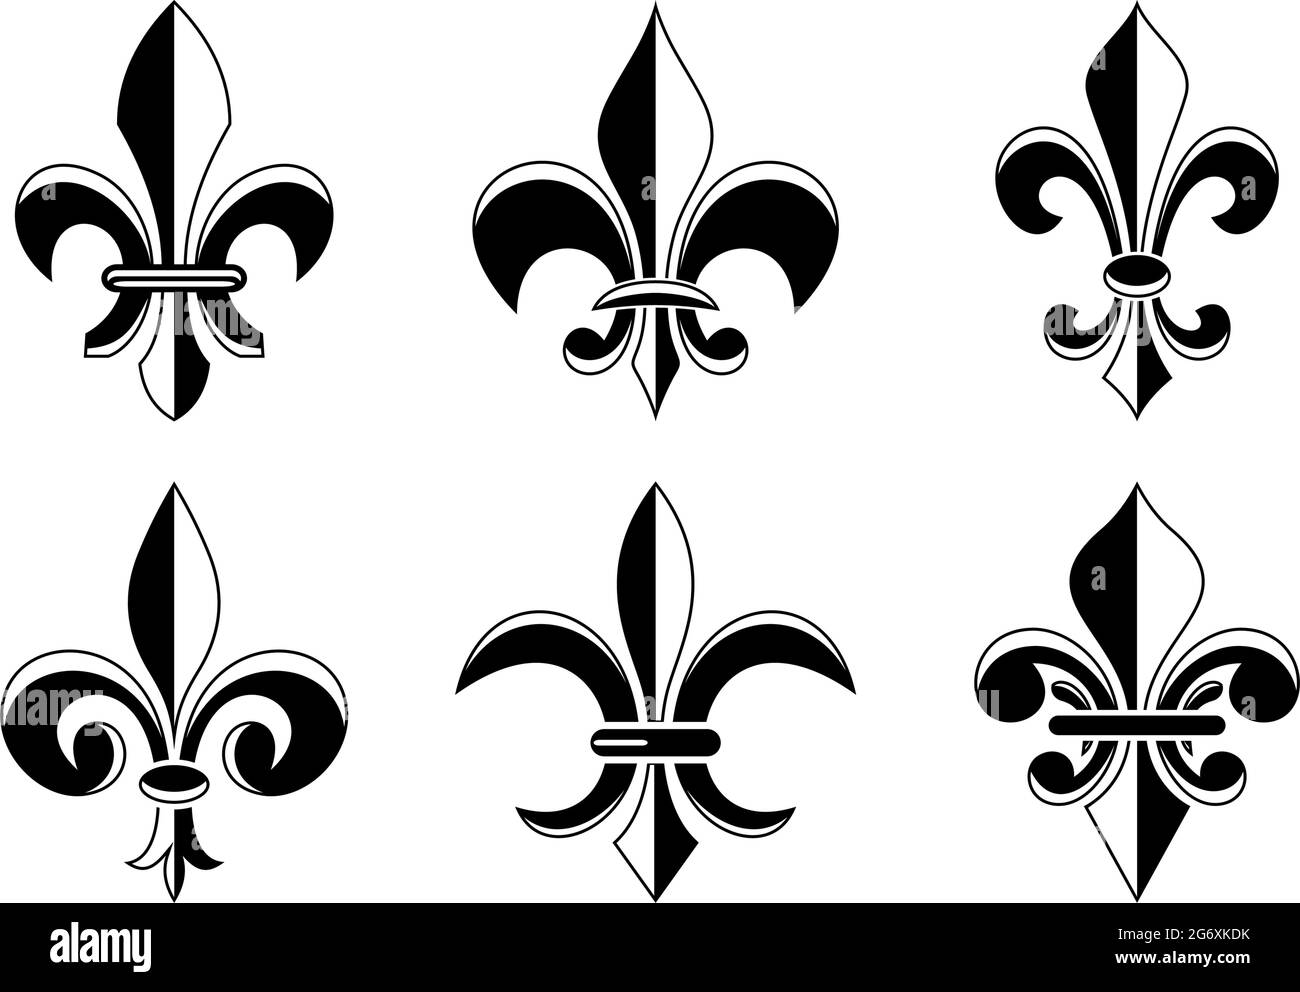 Fleur-de-lis symbol in different variations on a white isolated background. Stock Vector